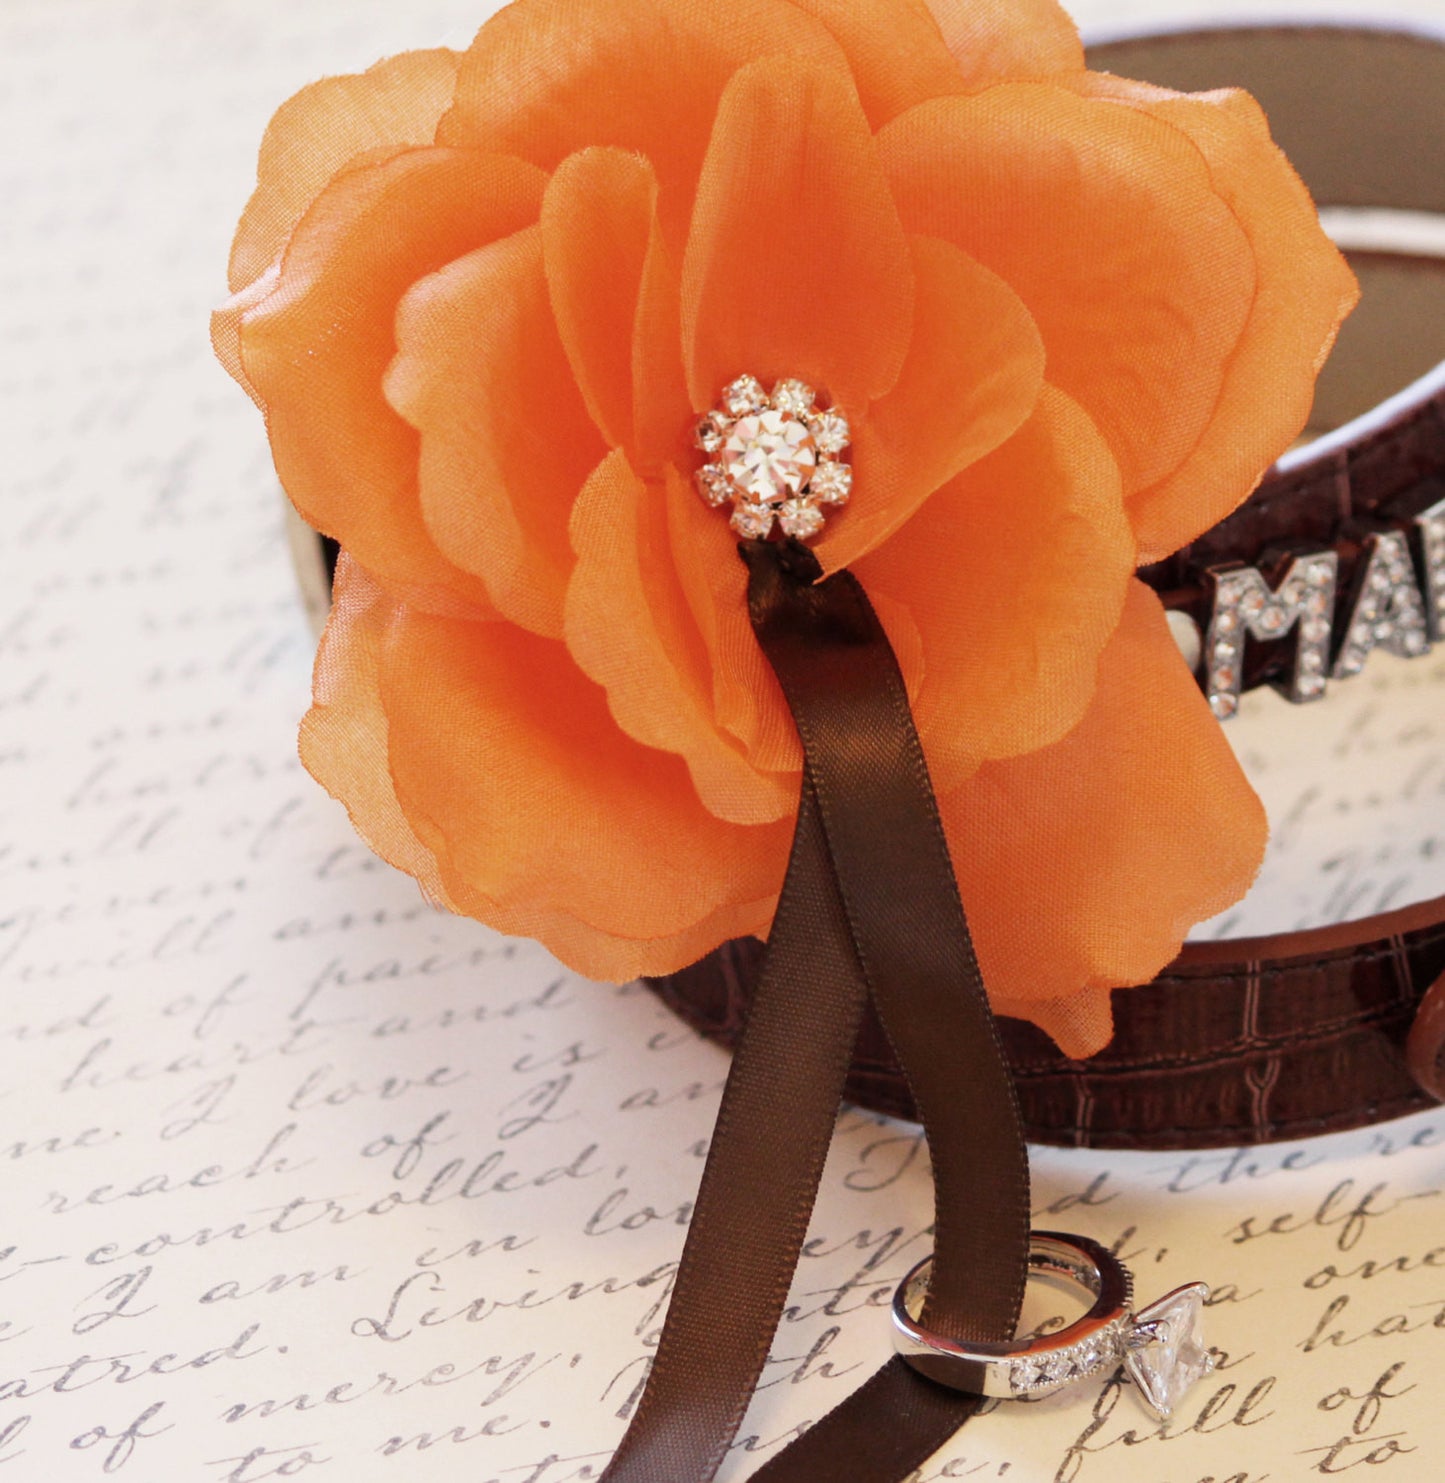 MARRY ME, Dog Collar, Brown Leather dog Collar with Marry me letters and Orange Flower ,Proposal Idea , Wedding dog collar